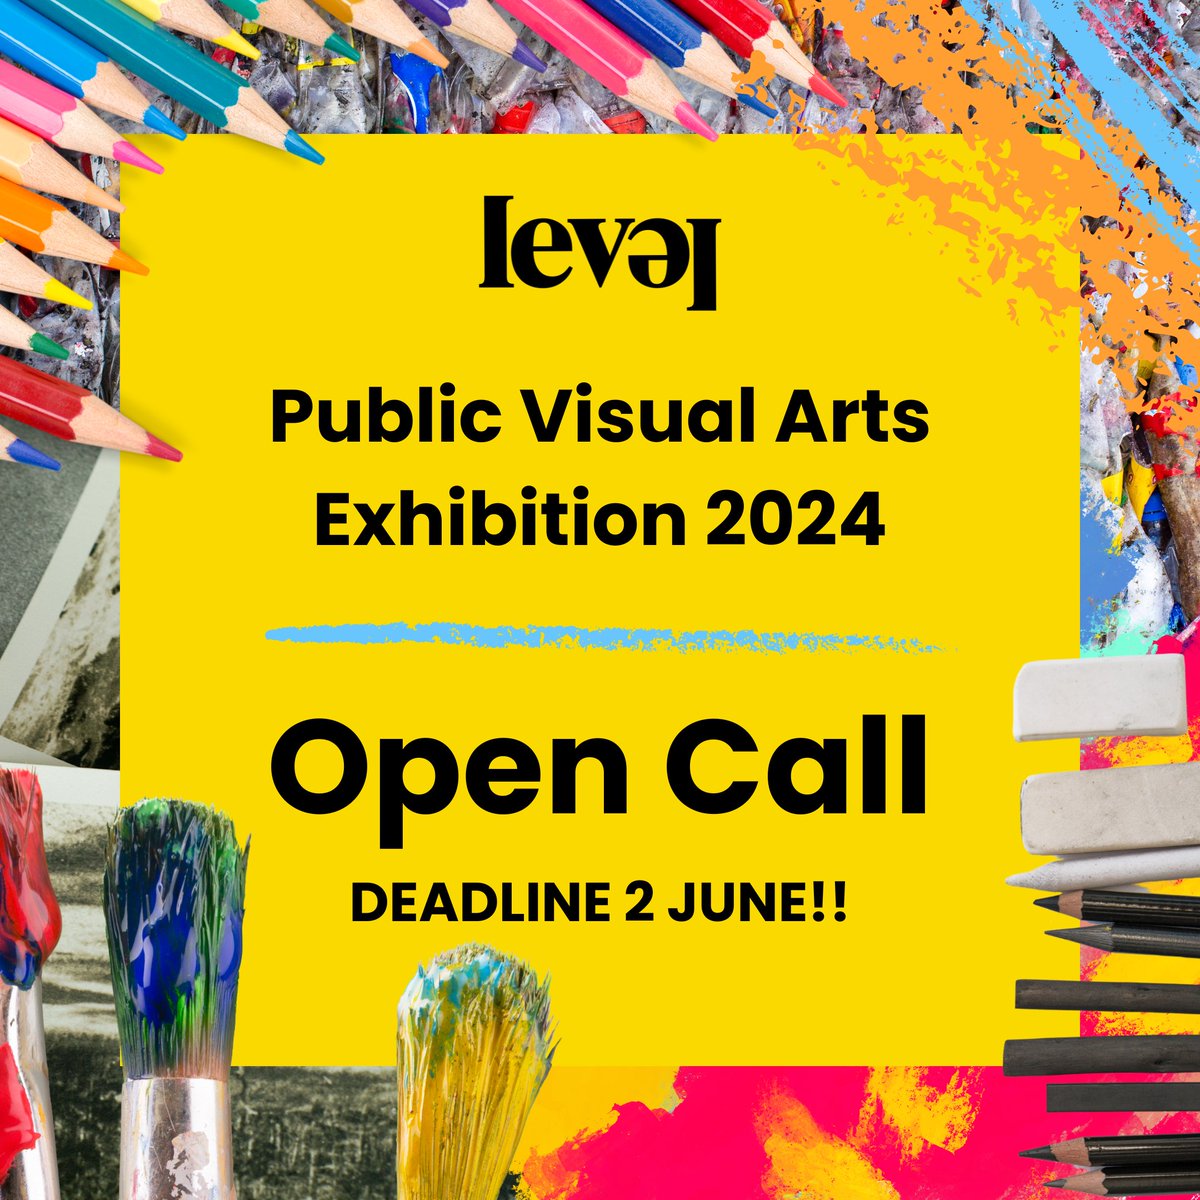 Public Open Exhibition 2024: Calling all UK based *disabled visual artists! We want the best 2D contemporary art by or for learning disabled, neurodivergent, & disabled artists! Prizes, awards & the chance to exhibit at LEVEL! bit.ly/VisArtsCallOut #OpenCall #DisabilityArts